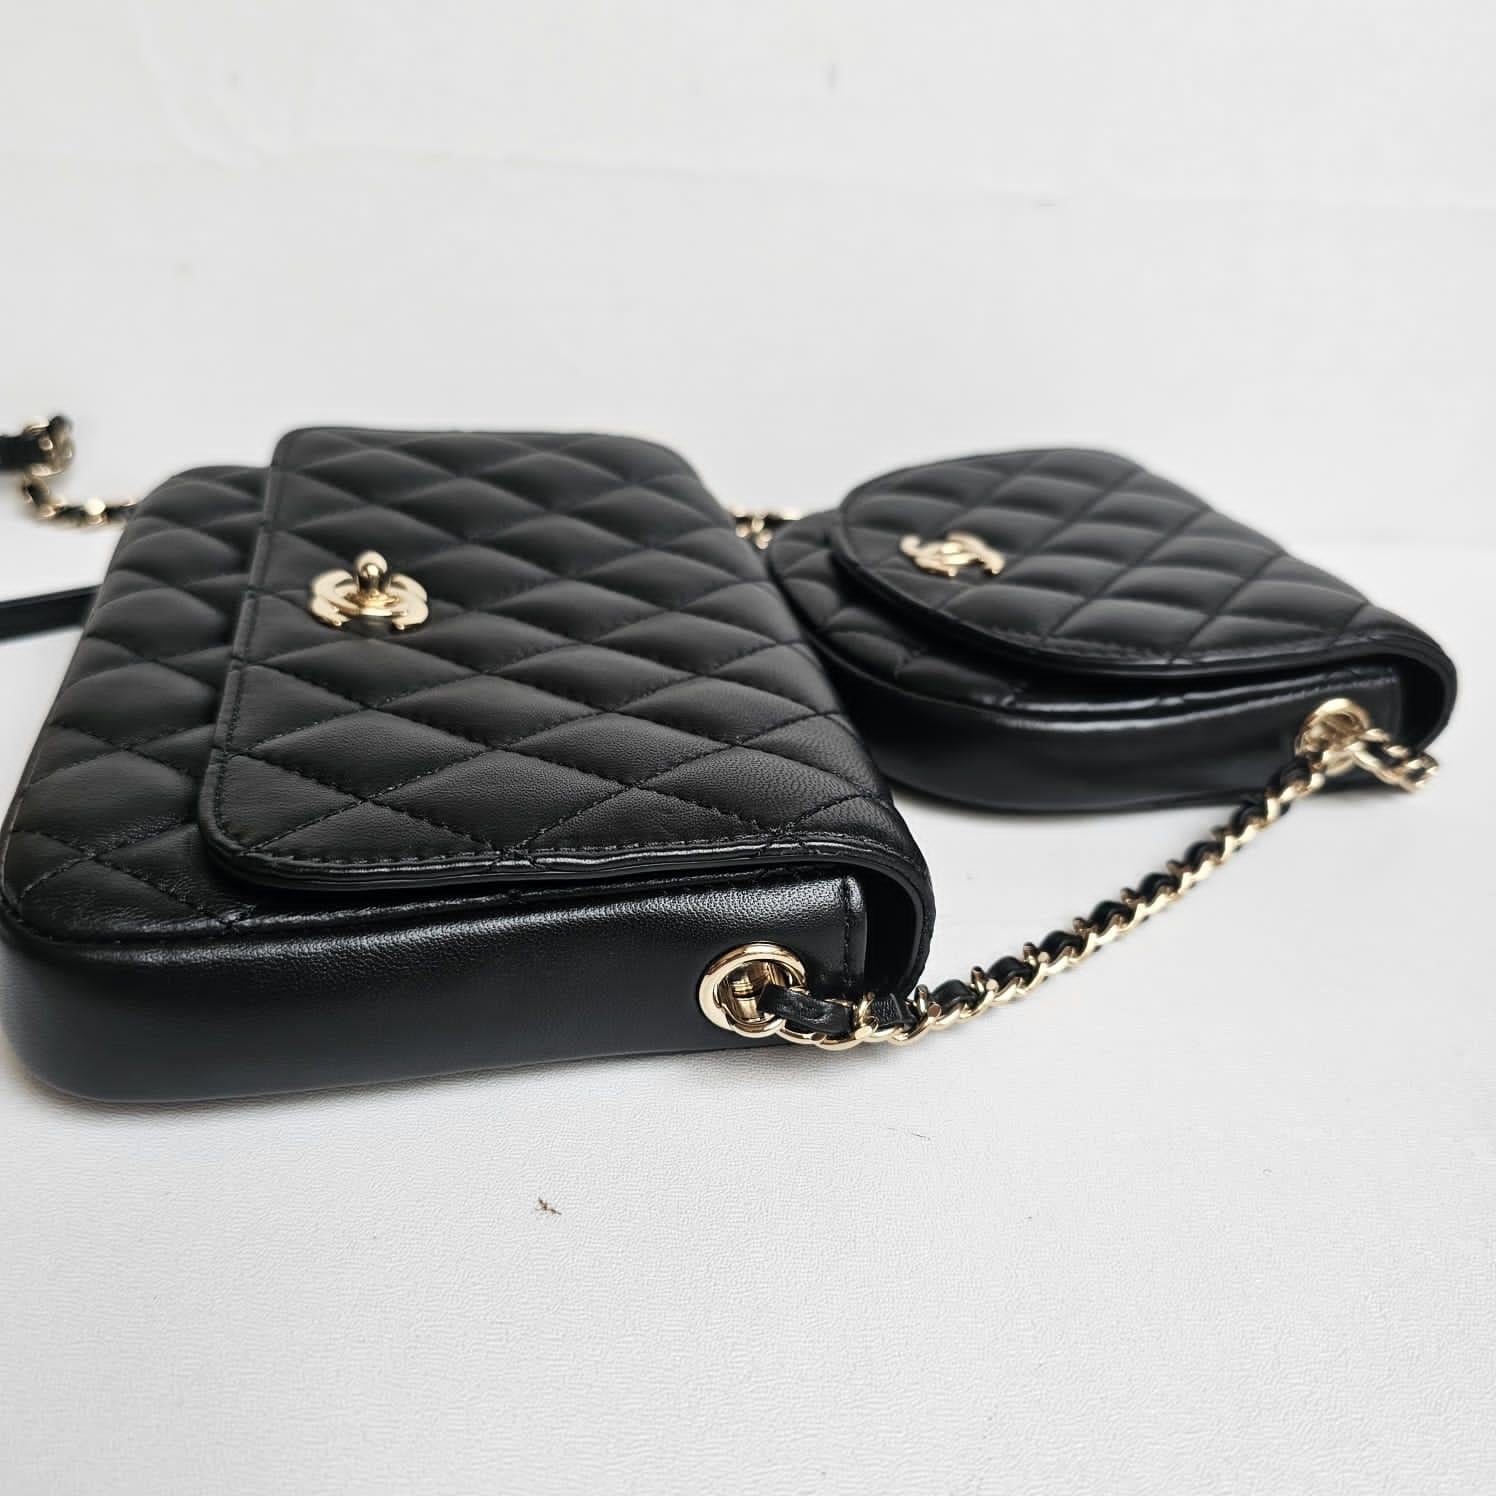 Rare Chanel Black Lambskin Quilted Side Pack Double Bag In Good Condition For Sale In Jakarta, Daerah Khusus Ibukota Jakarta